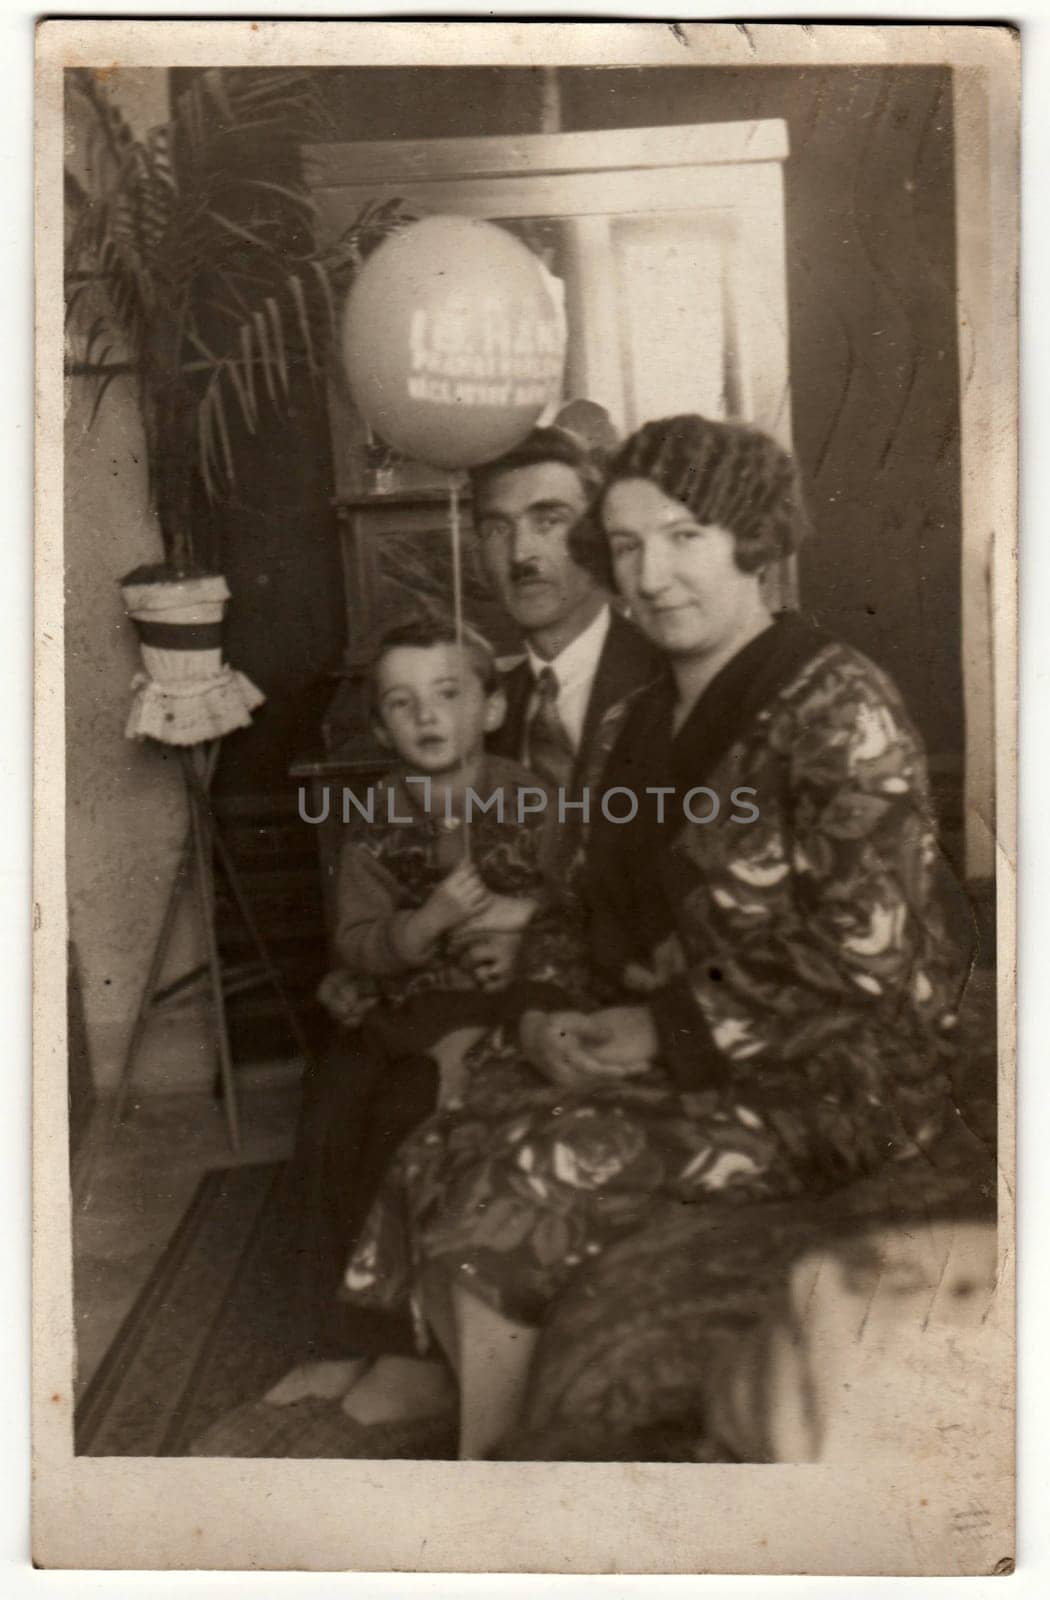 Vintage photo shows family in the living room. Boy holds air-ball - inflatable ball. Retro black and white photography. Circa 1930s. by roman_nerud